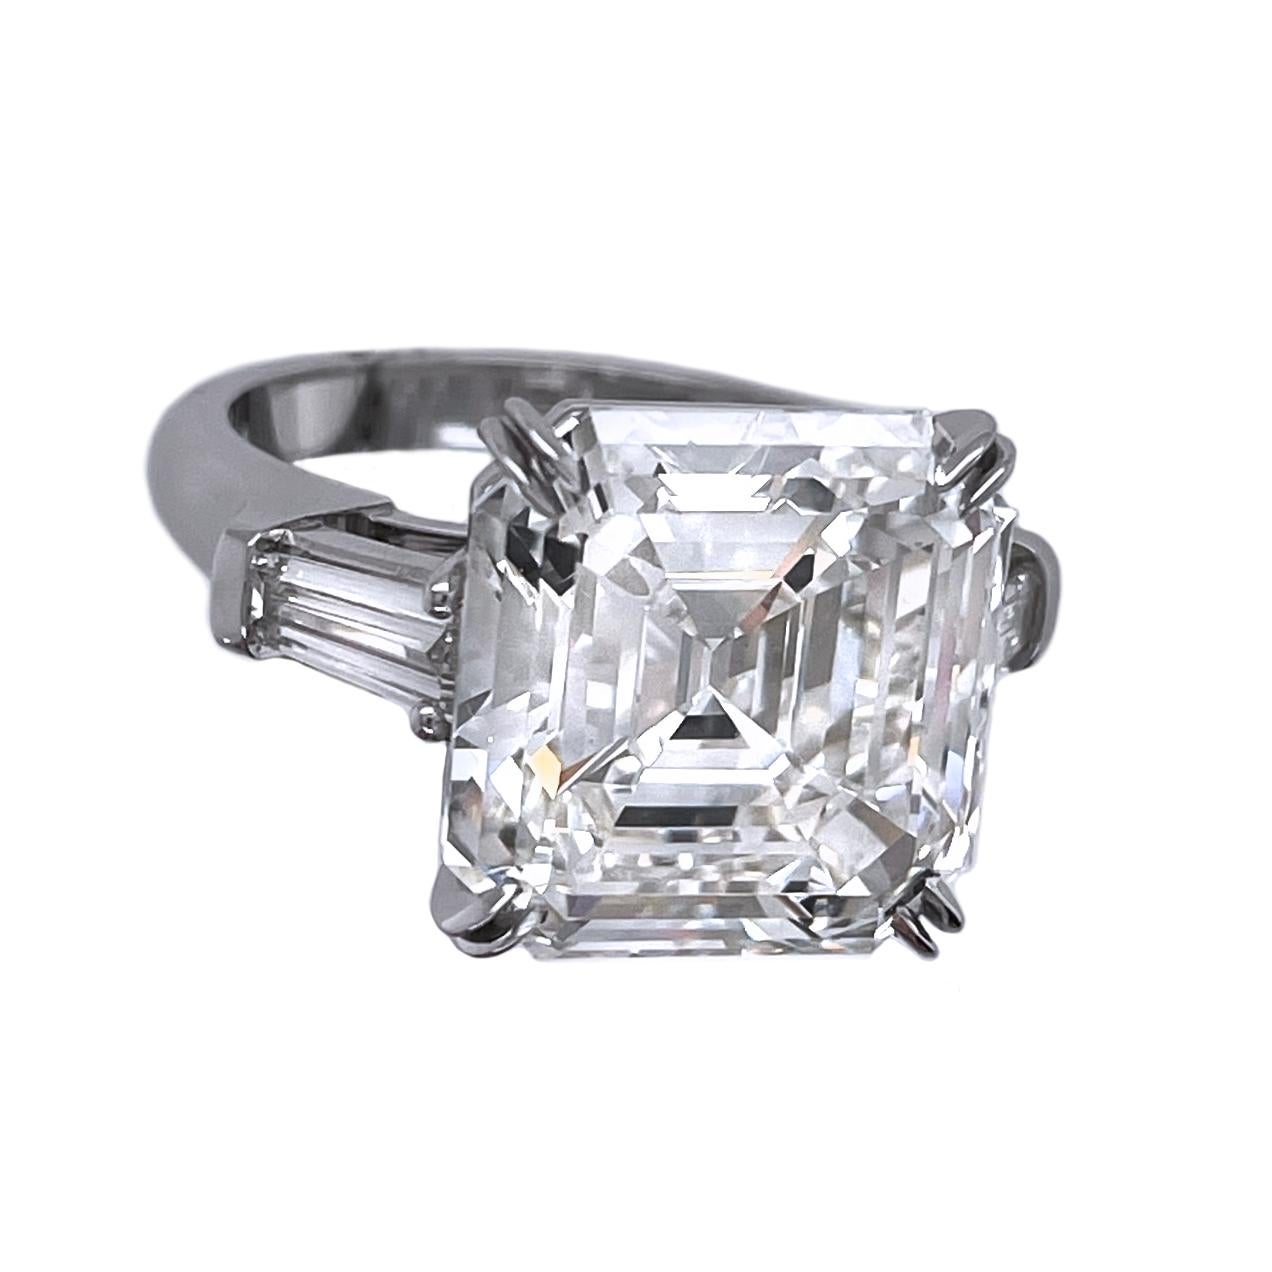 For Sale:  9.82 Carat Square Emerald Cut Diamond Ring GIA Certified 2